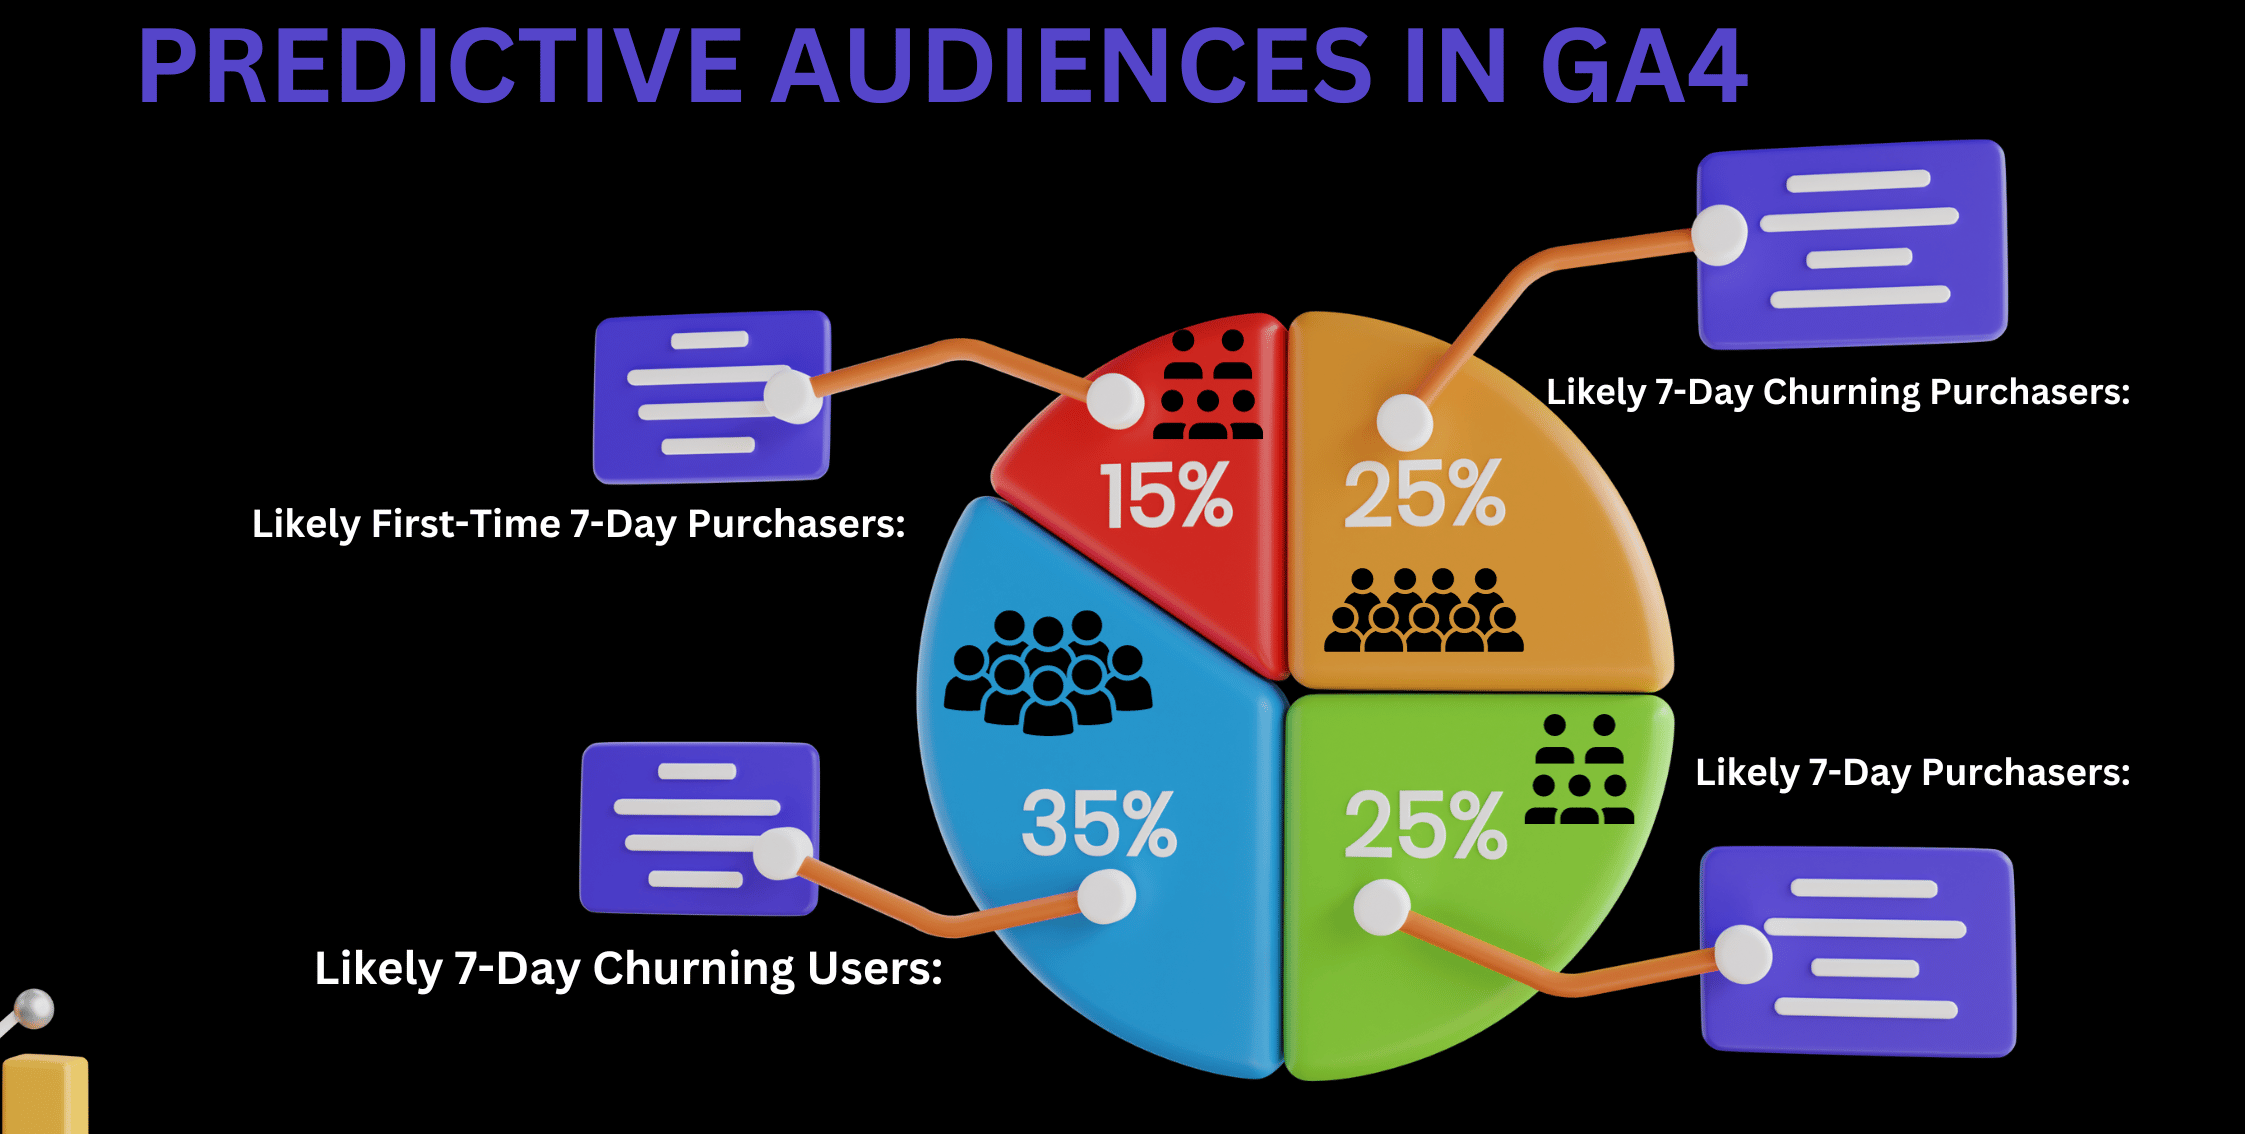 What are Predictive Audiences in GA4?